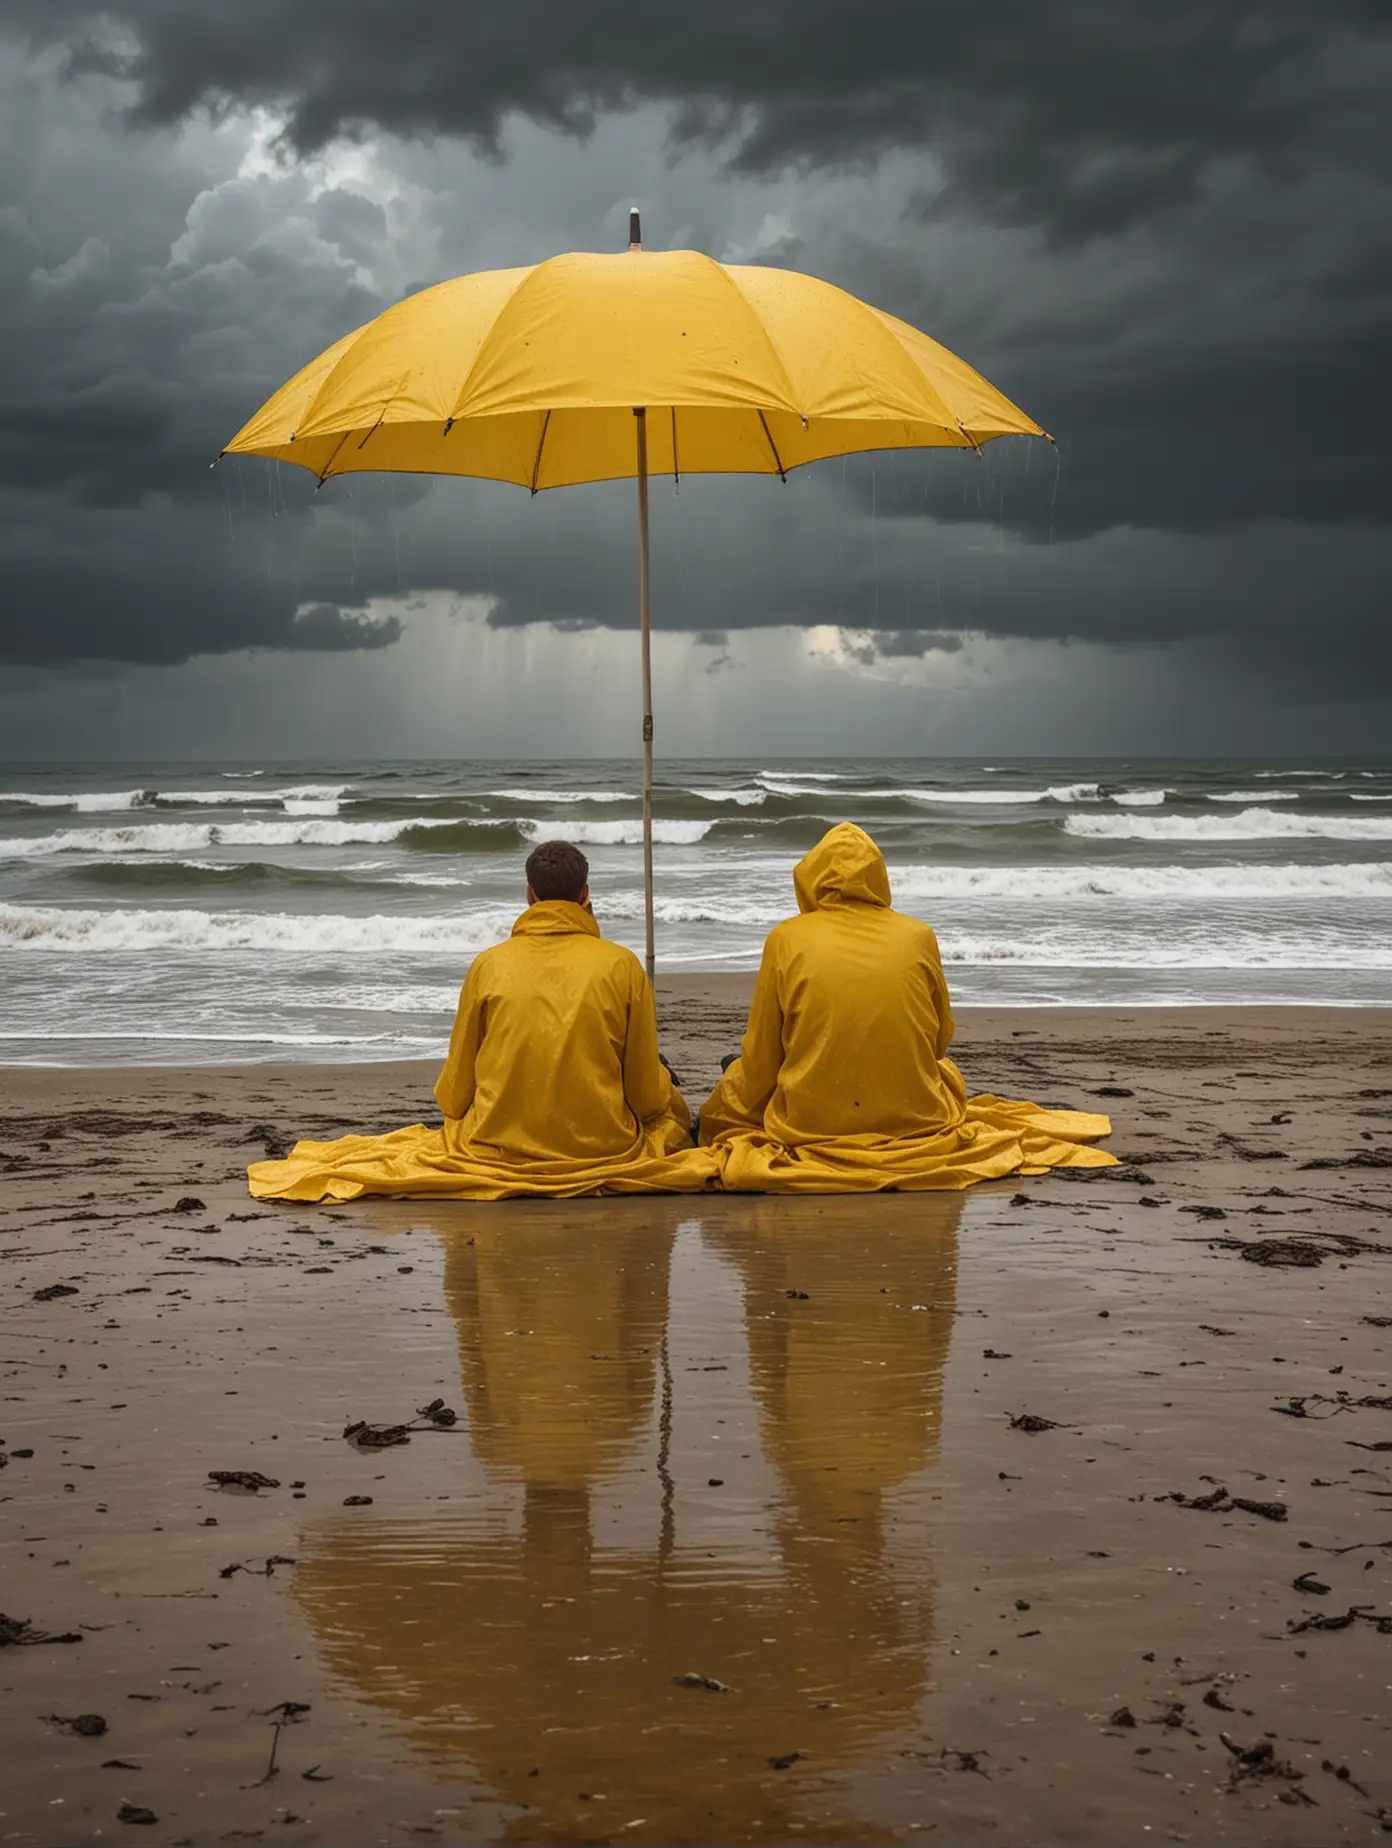 a couple in yellow oilskins, sitting on the beach, under a big umbrella, a plastic tarp laid out on the sand, it's pouring rain, Brittany sea setting, gray, threatening sky, storm and lightning, photography, realistic